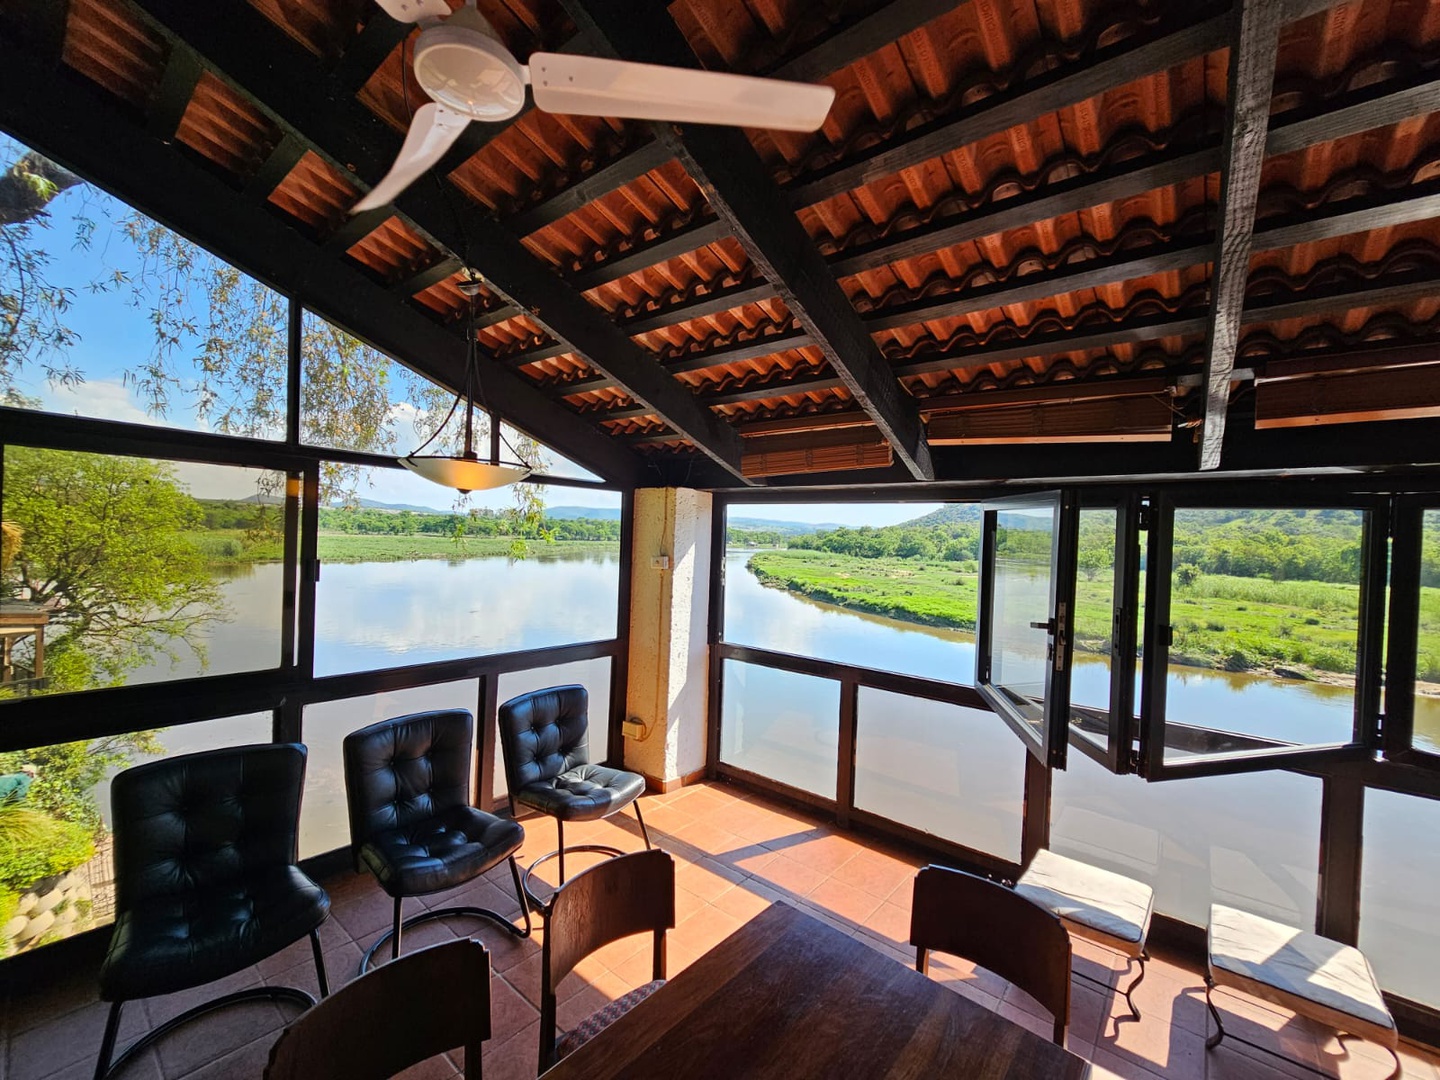 House in Ile du Lac - Sunroom with gorgeous views